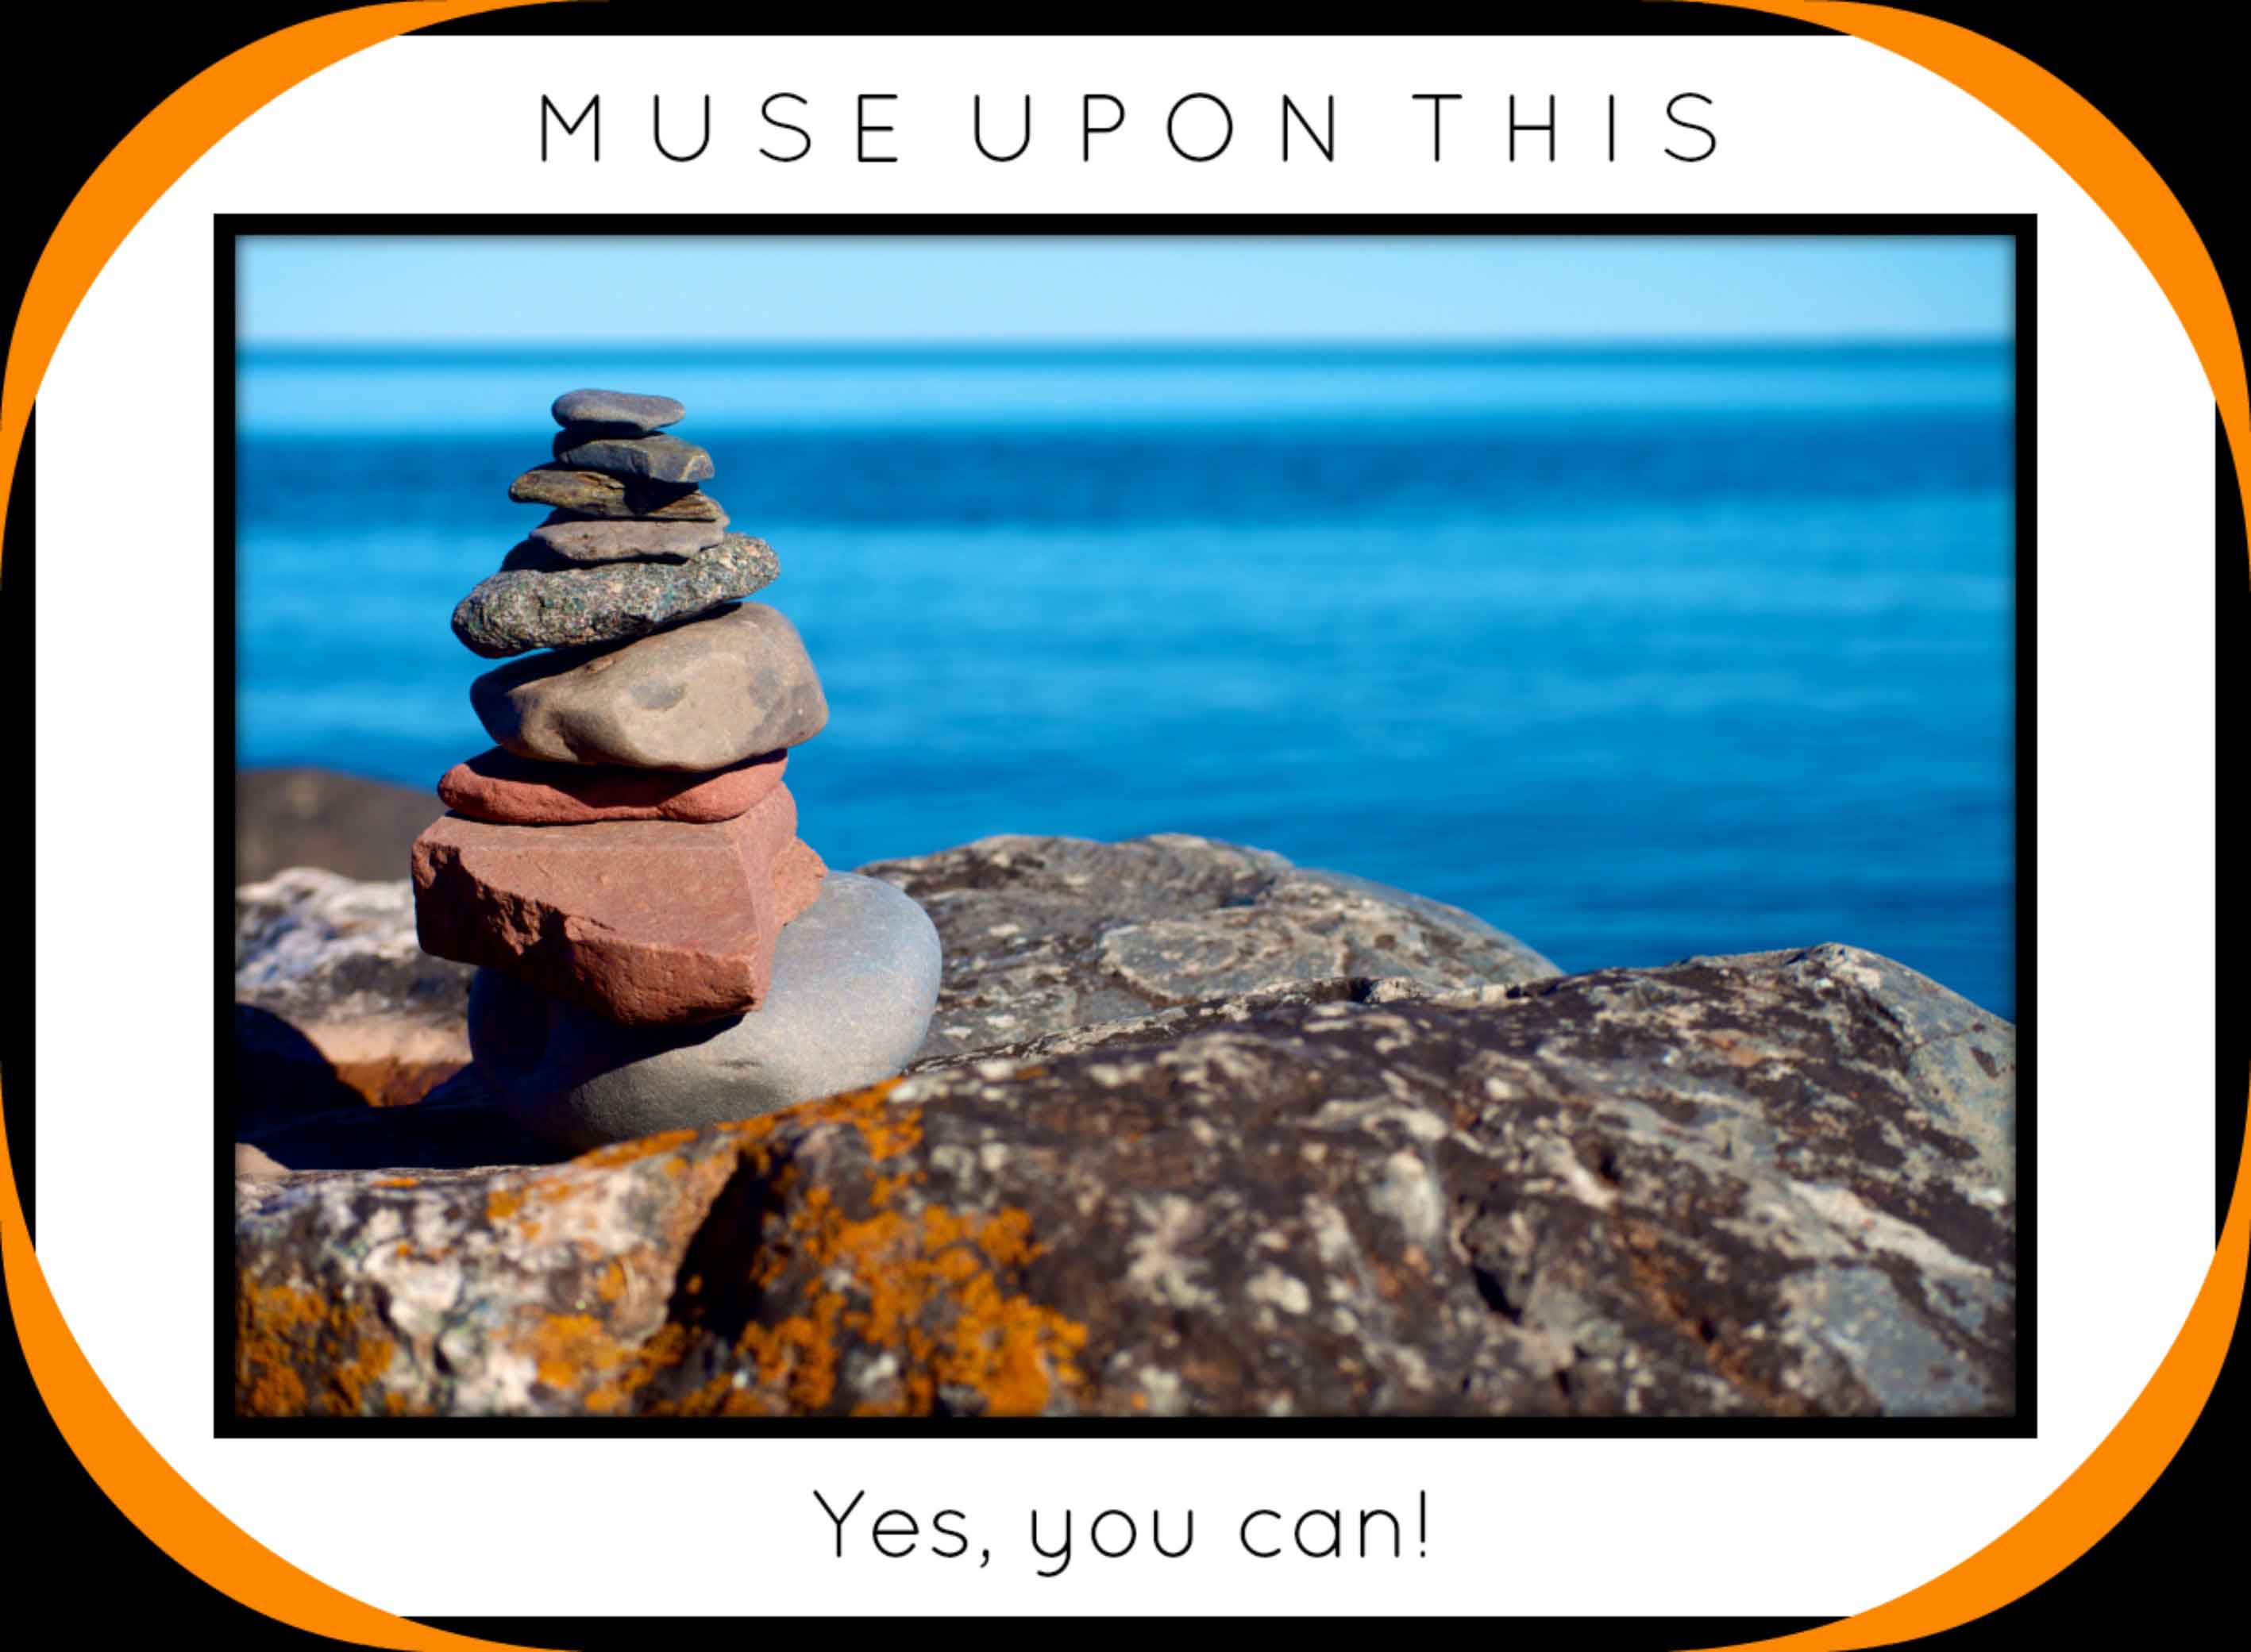 Monday Morning Musing:  Yes, you can!